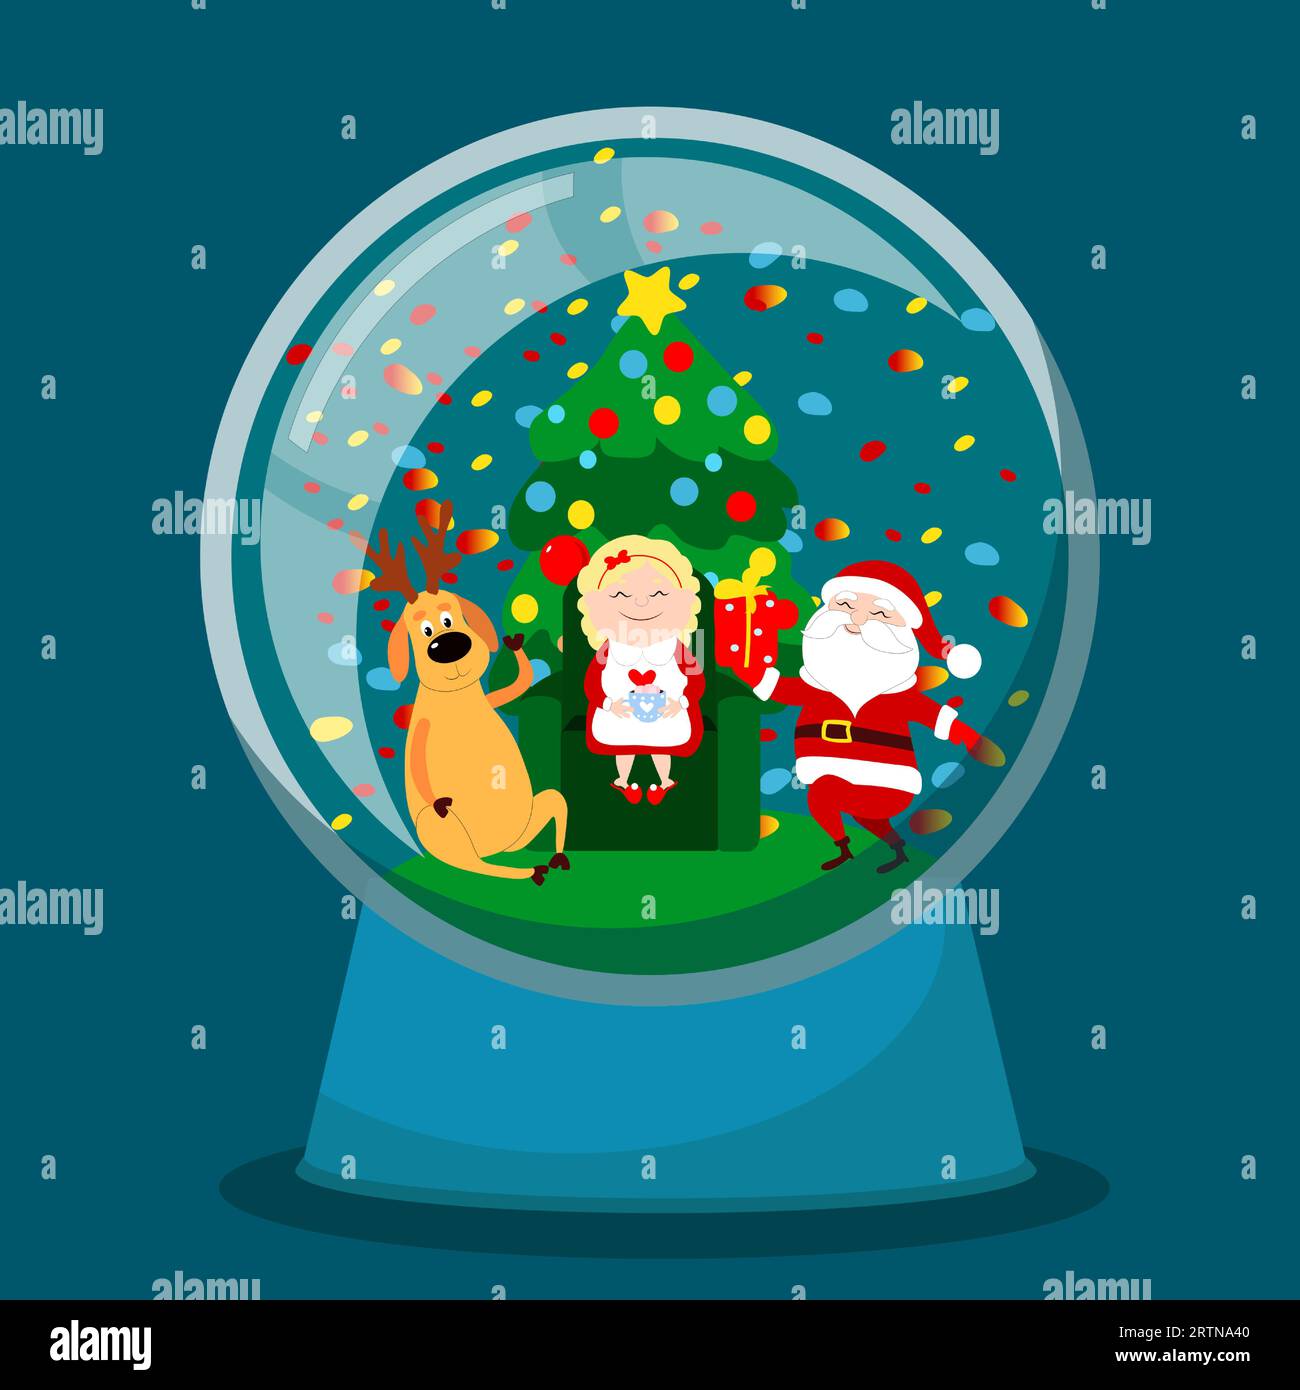 Inside a glass decorative ball Mrs. Santa Claus and a reindeer and Santa Claus with a gift. The atmosphere of comfort, holiday, Christmas. Stock Vector